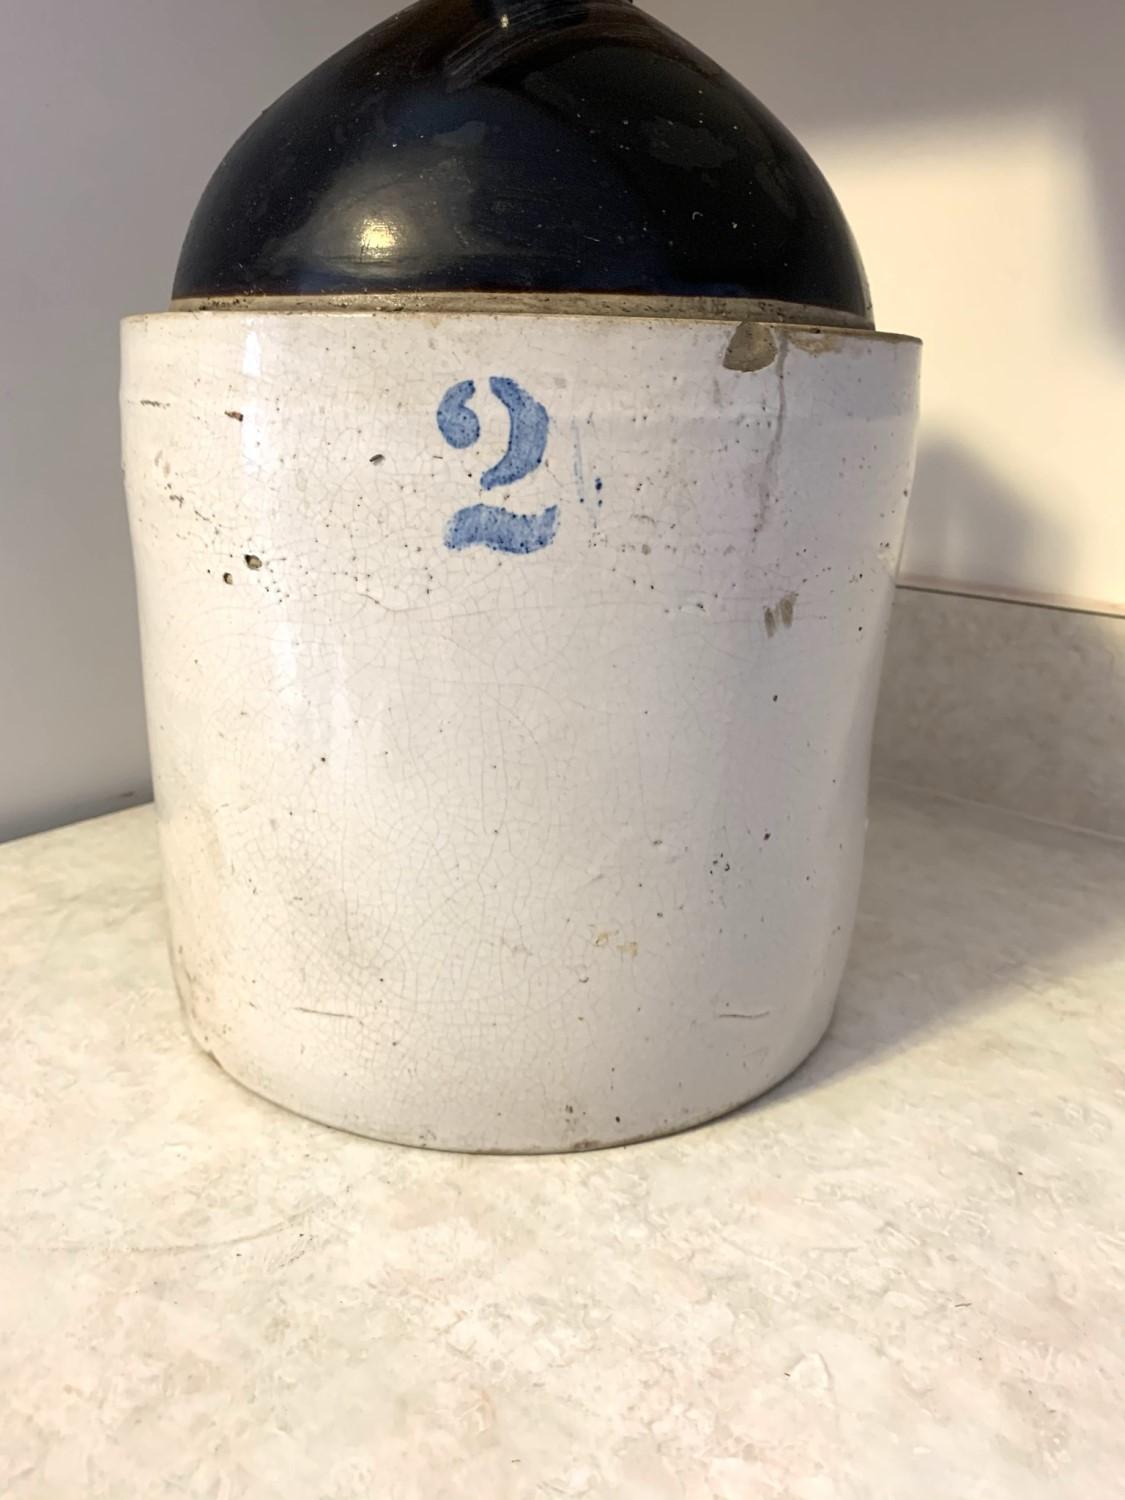 Antique 2 Gallon Stoneware Crock with Lid